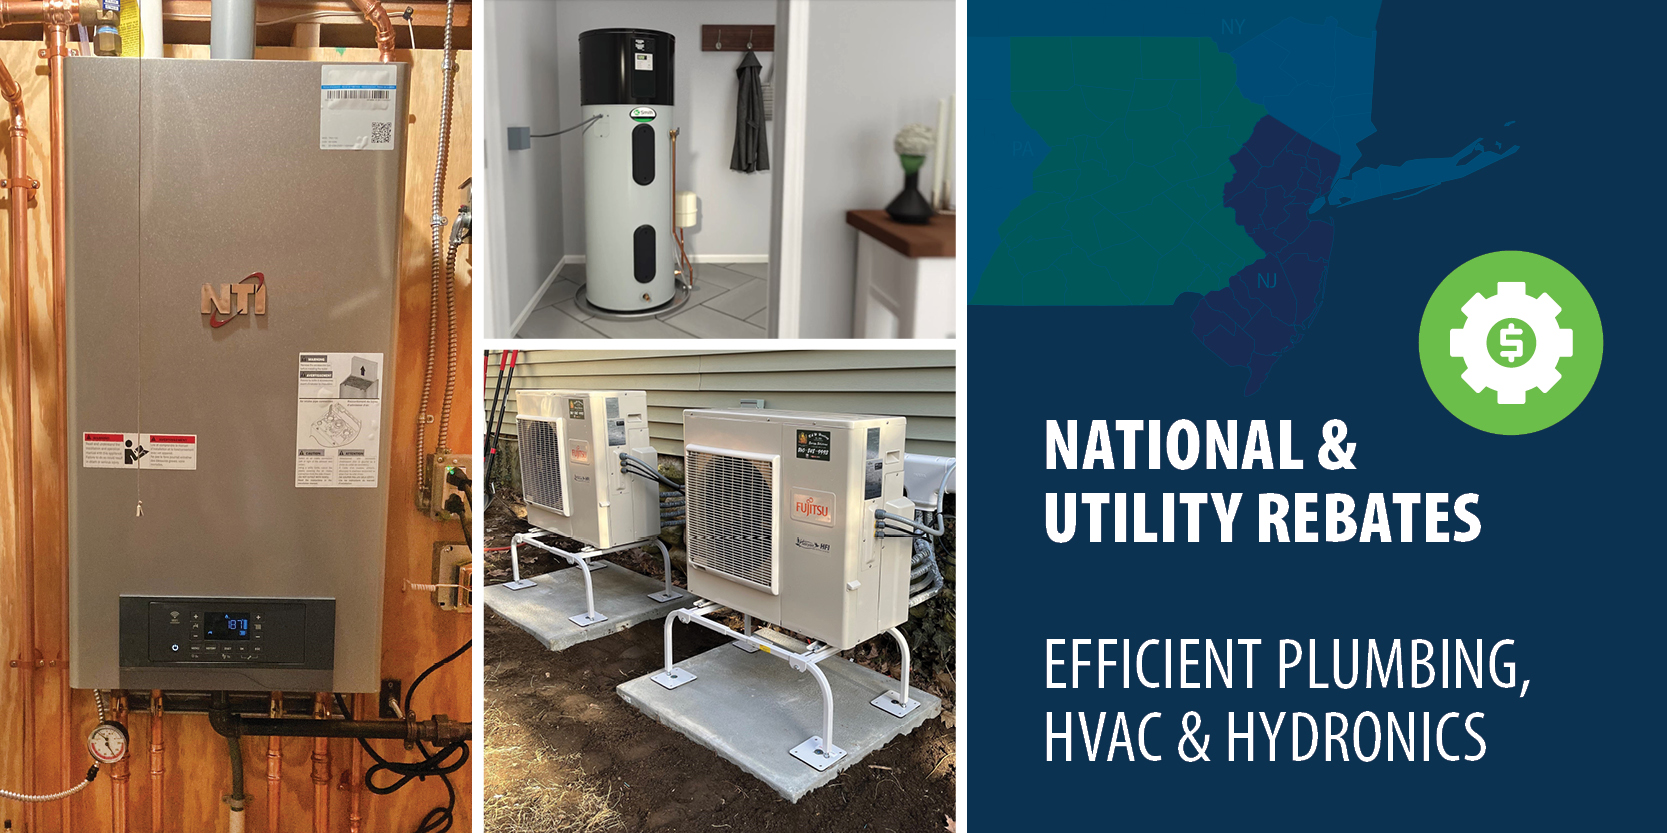 Utility Rebates National Discounts Heating Cooling Hot Water Wales Darby